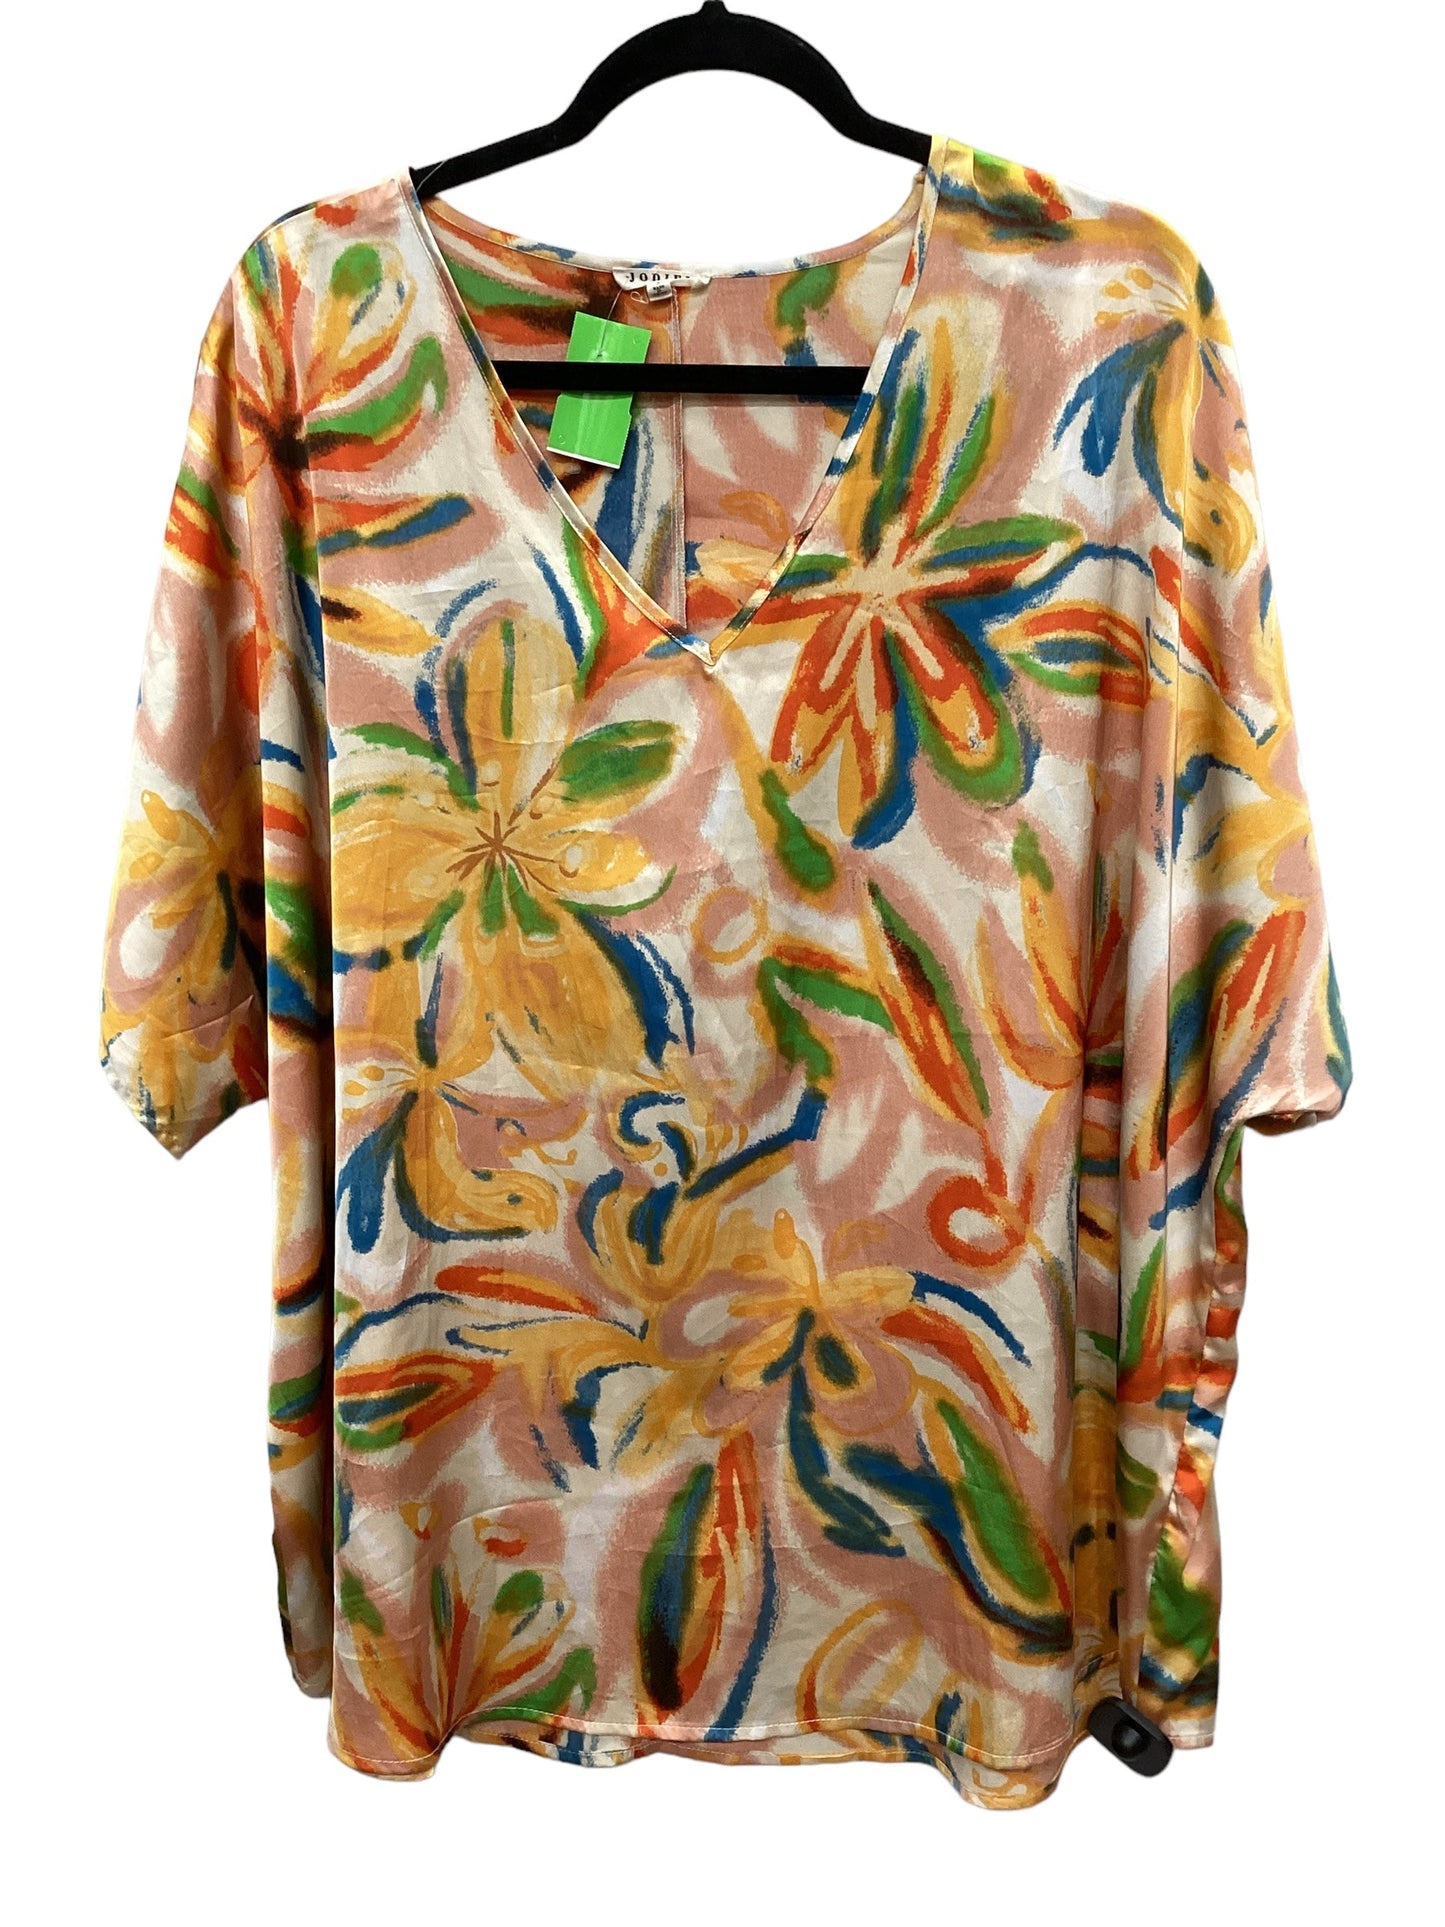 Multi-colored Top Short Sleeve Jodifl, Size S